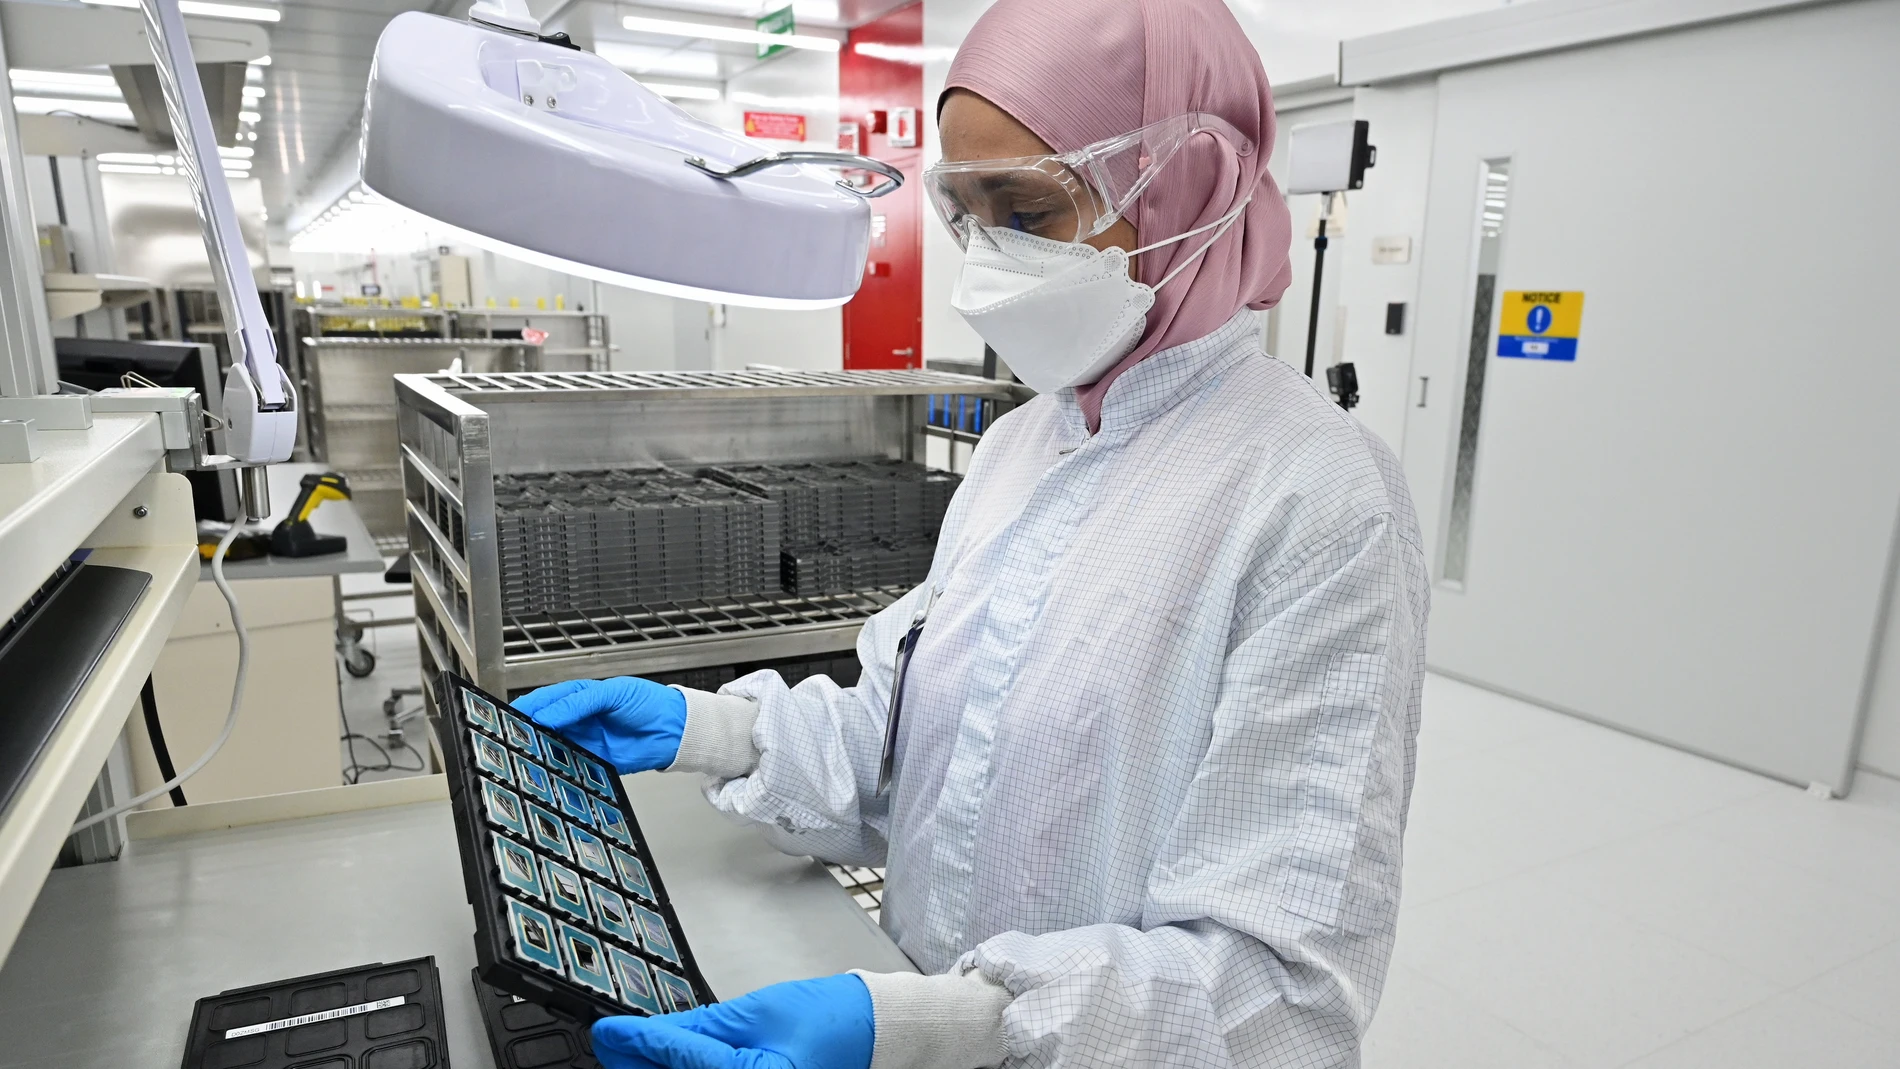 A factory technician at Intel’s Penang Assembly Test facility inspects a tray of Intel Core Ultra processors before they are shipped from the factory in Penang, Malaysia. On Dec. 14, 2023, Intel introduced the Intel Core Ultra mobile processor family. Powered by Intel’s 3D performance hybrid architecture and built on the Intel 4 process, new H- and U-Series processors deliver a balance of performance and power efficiency, immersive experiences, and AI acceleration. (Credit: Intel Corporation)